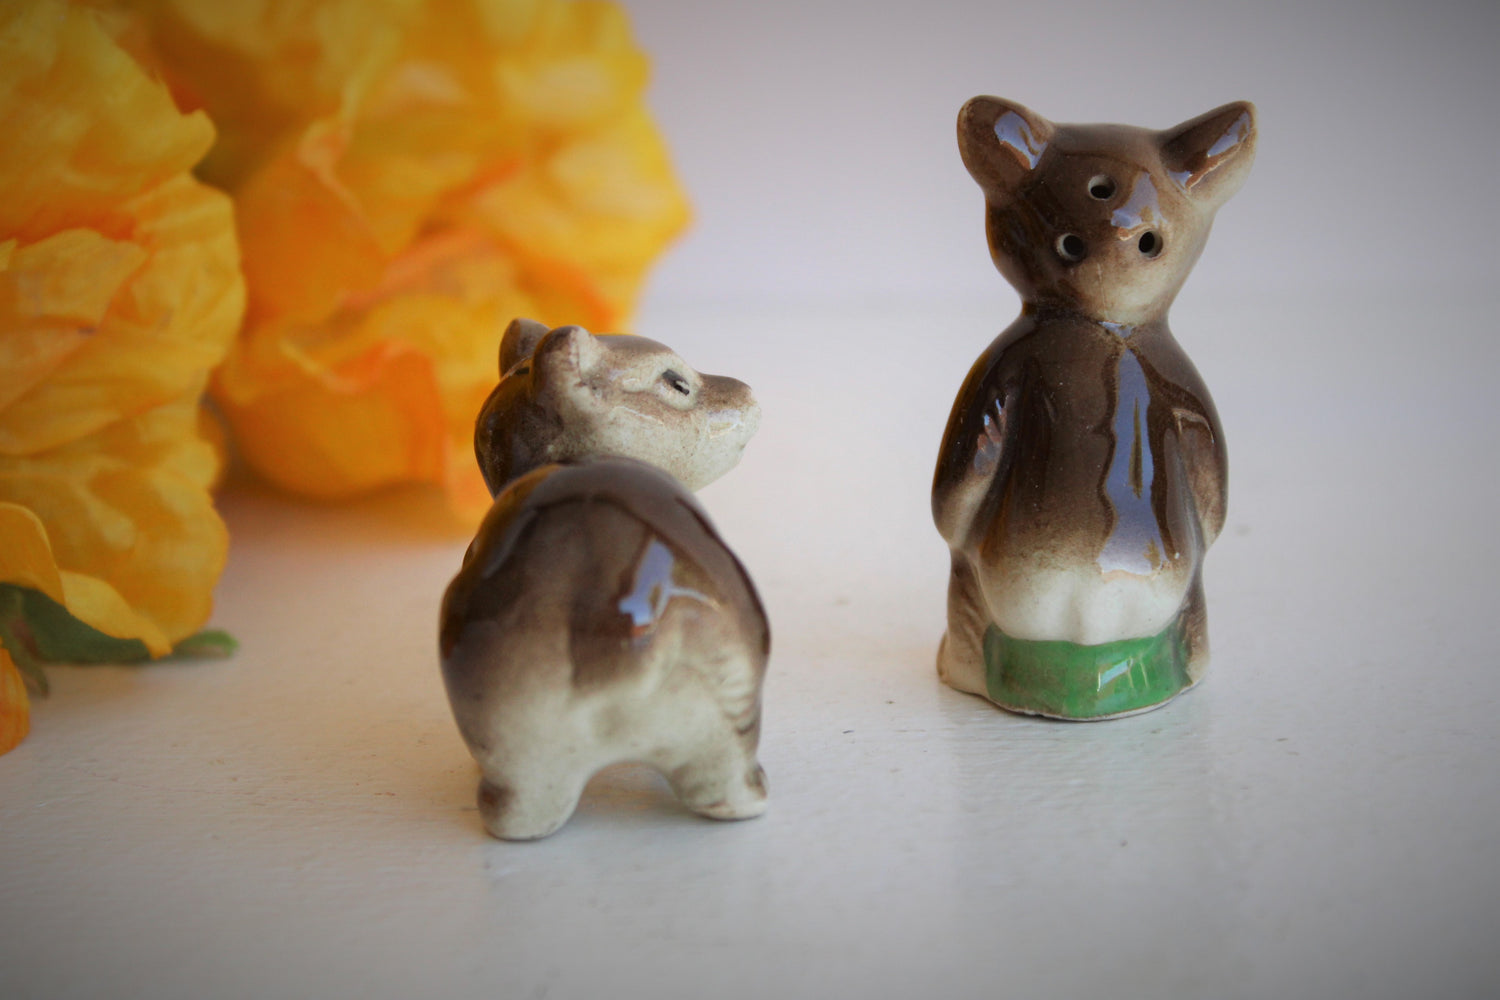 Vintage 1940s Bear Salt and Pepper Shakers From Japan